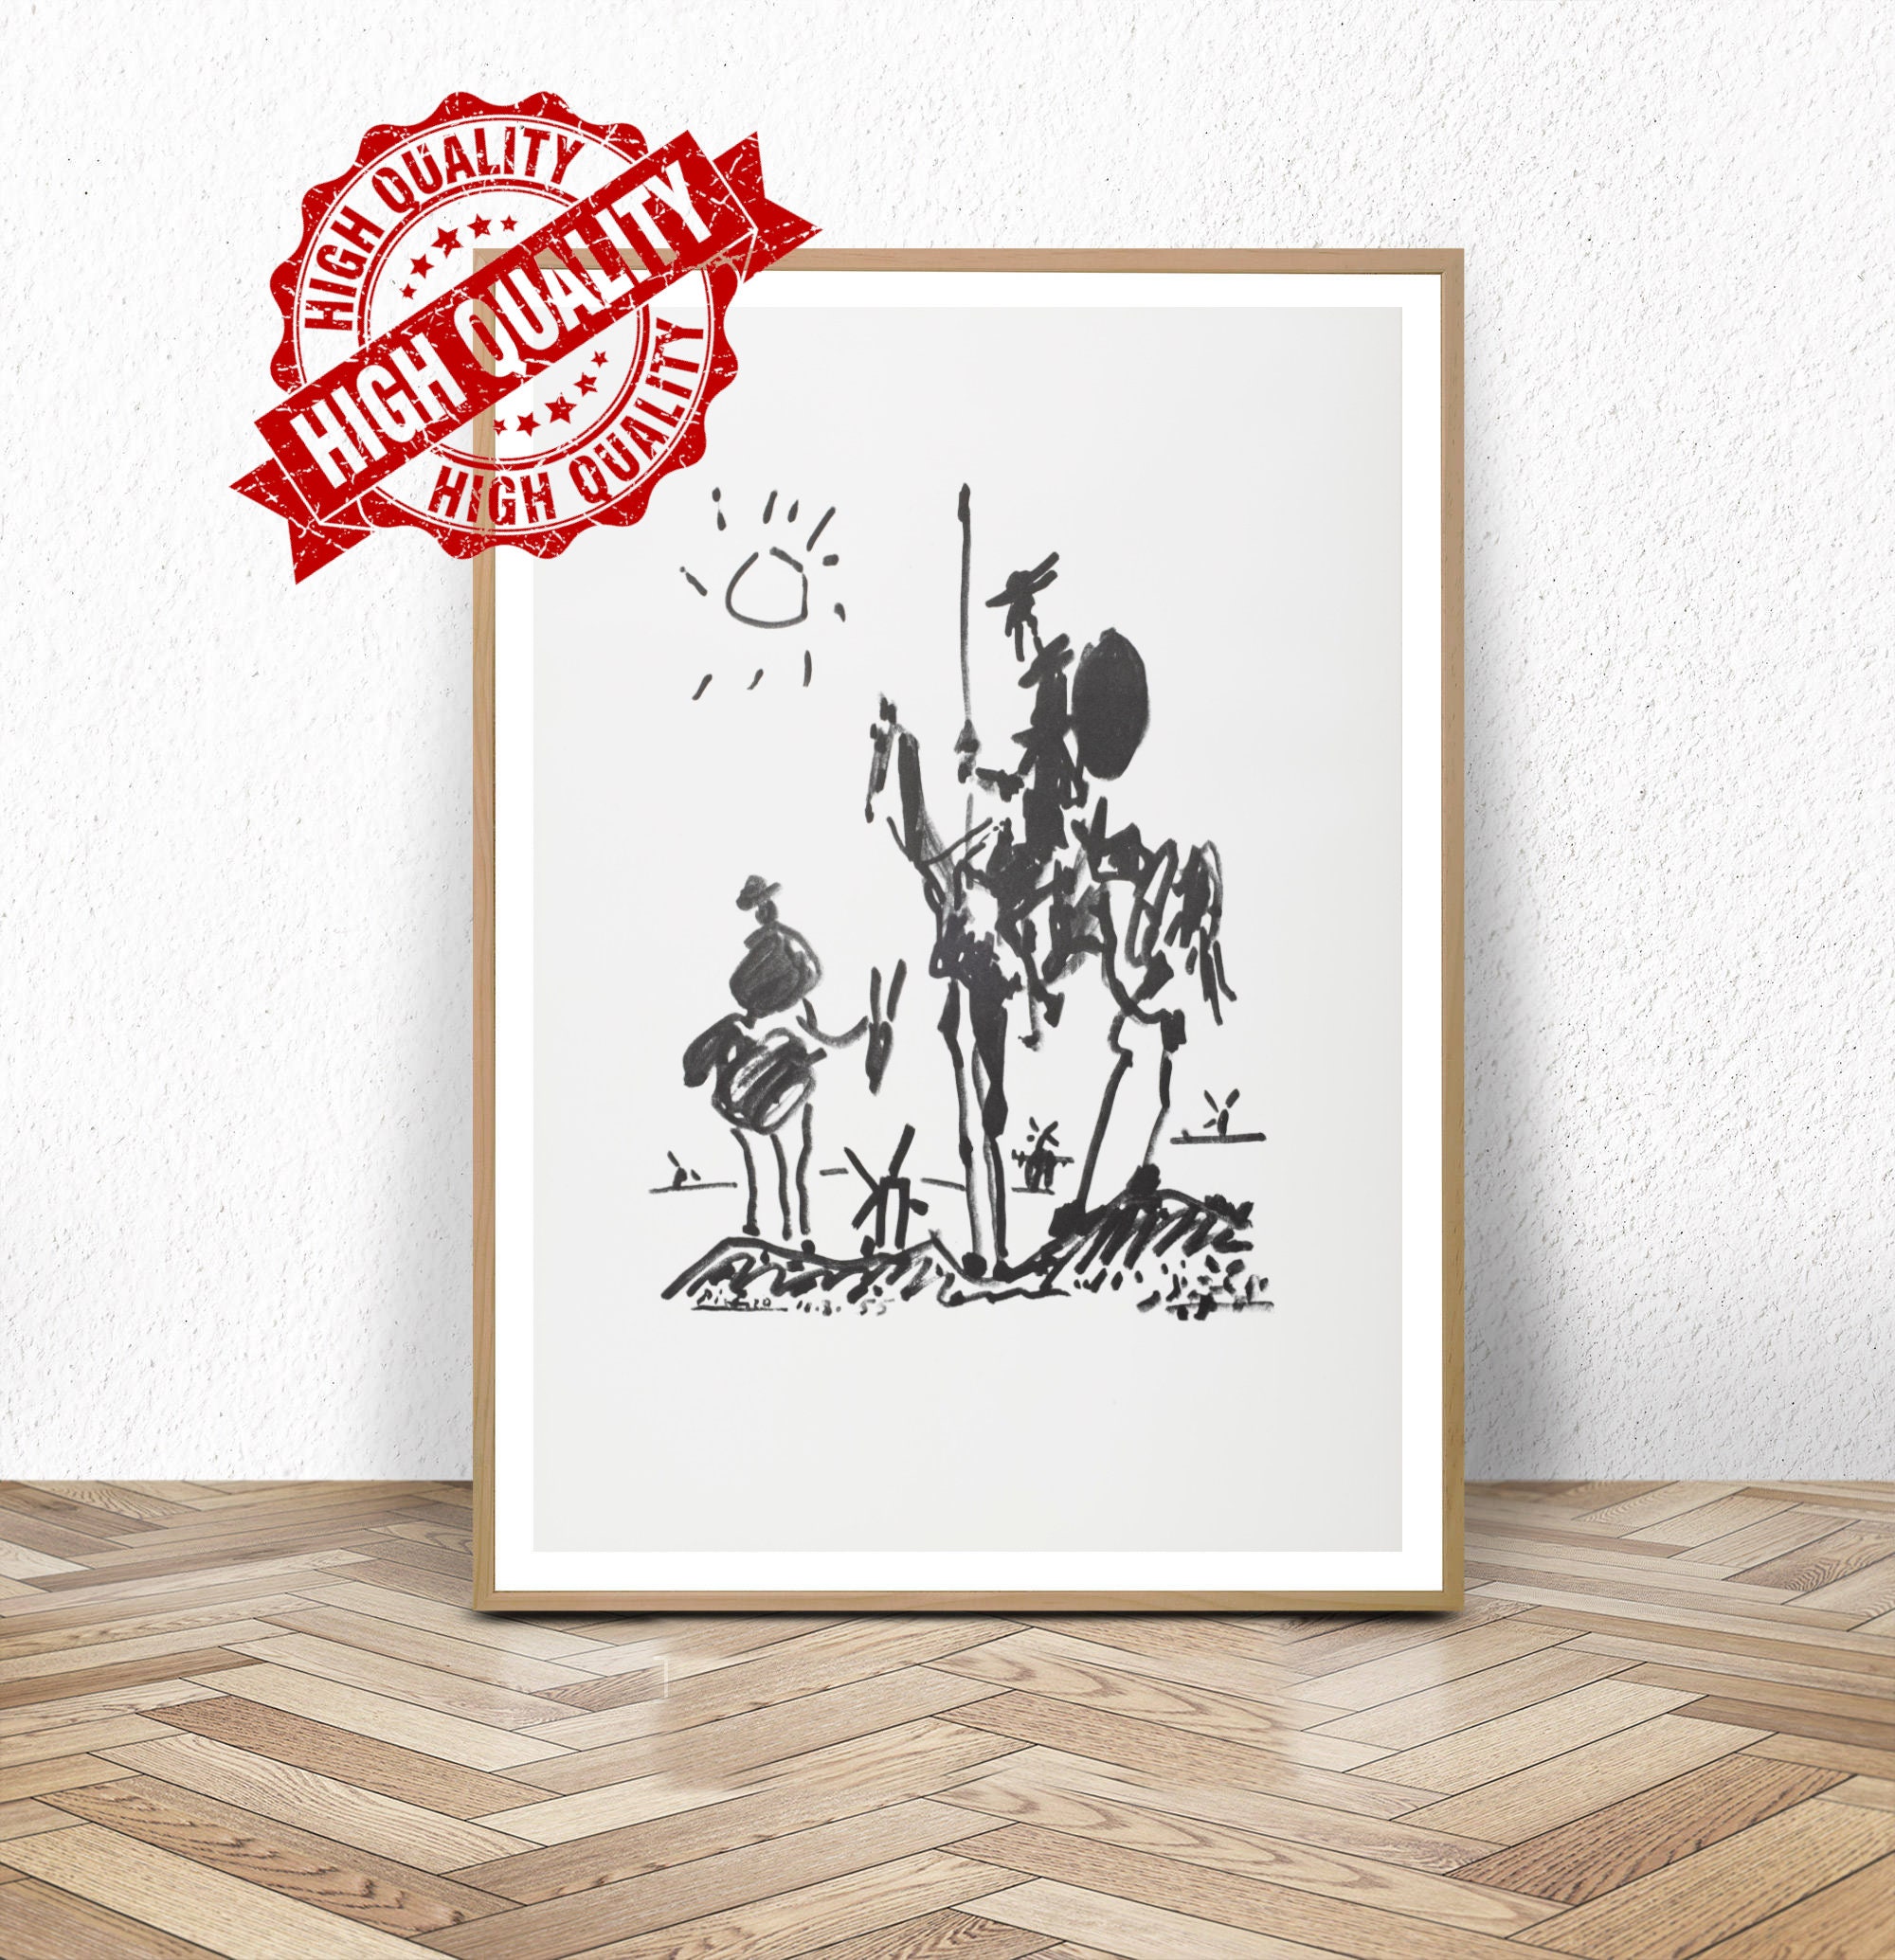 AD THEATRE Georges ROCHEGROSSE's Poster for Don Quichotte Framed type 12x16 inch 